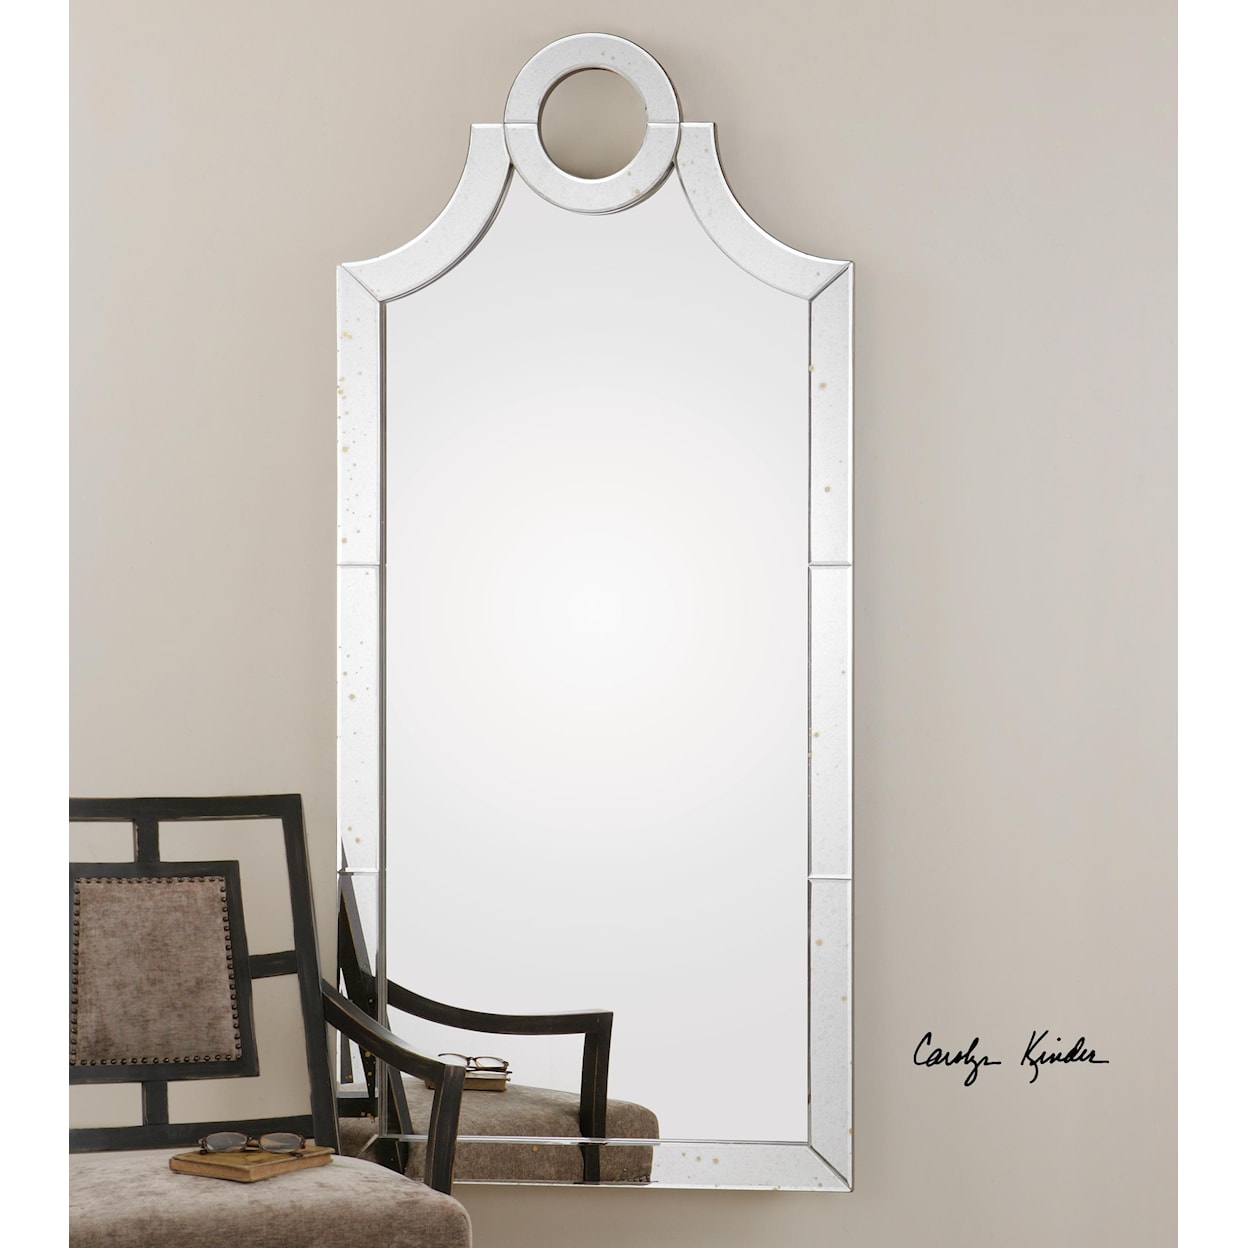 Uttermost Arched Mirrors Acacius Arched Mirror